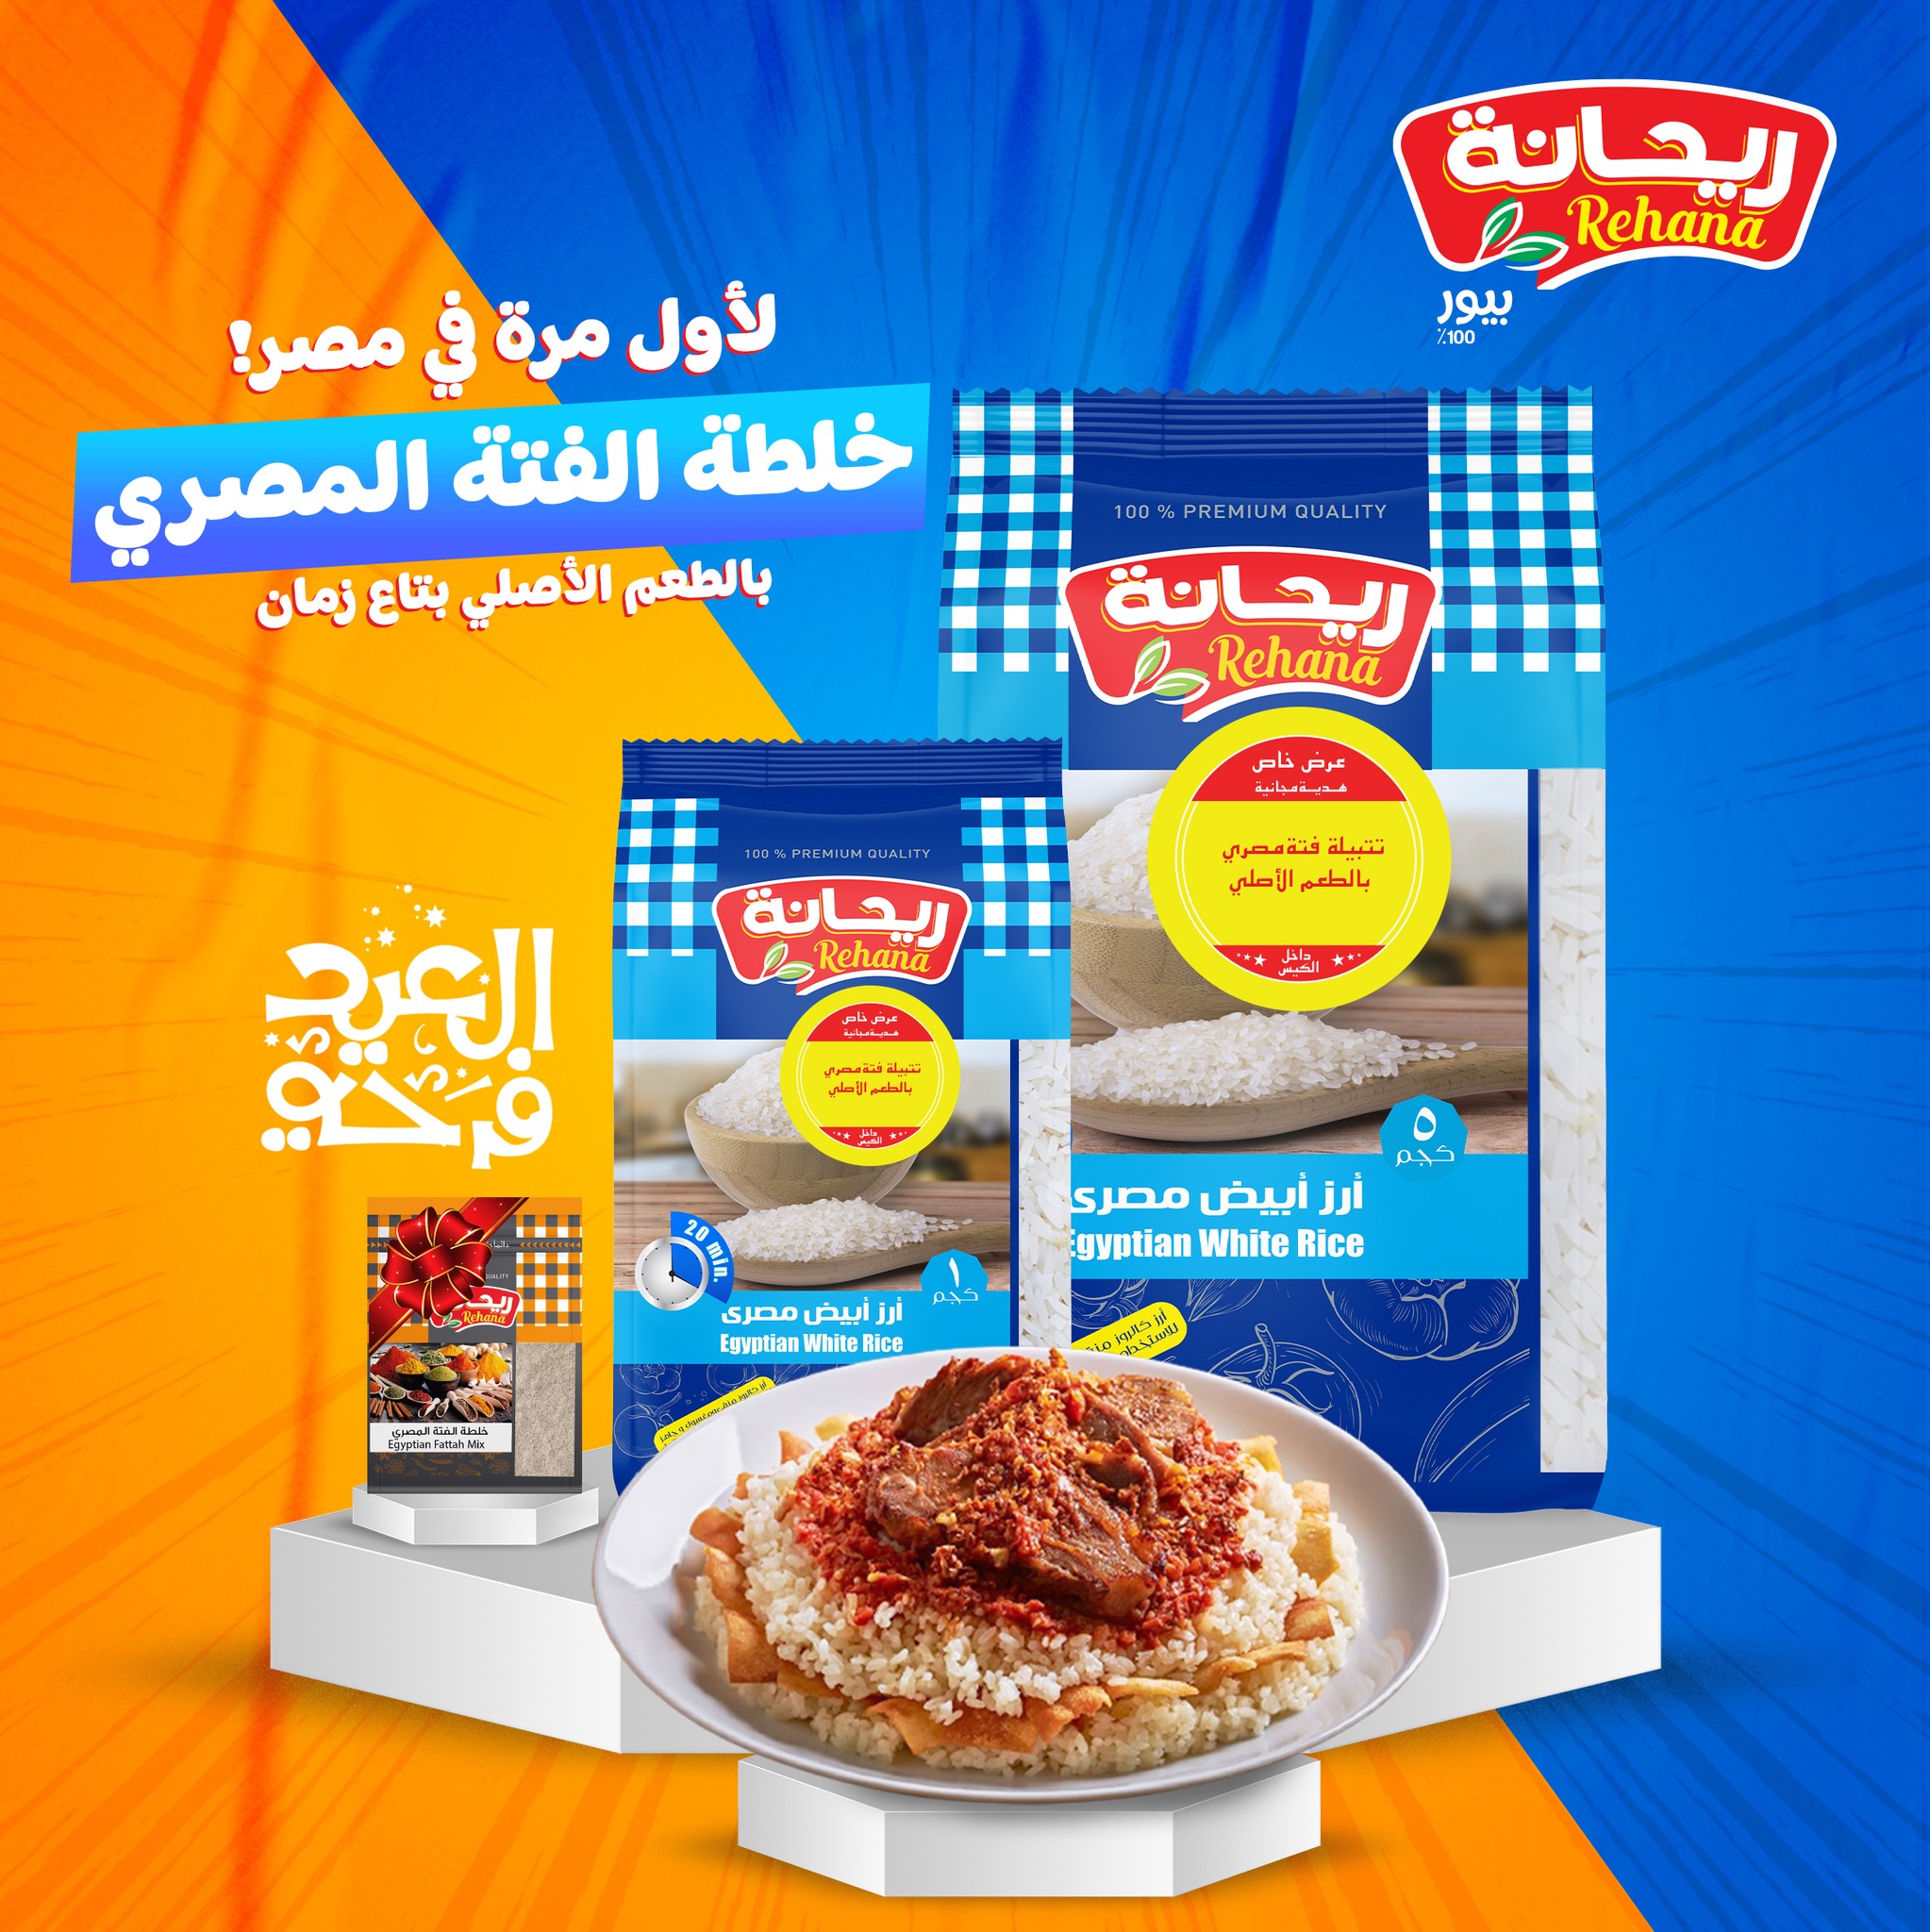 A new product, Egyptian fatteh mix, with the original taste of Zaman